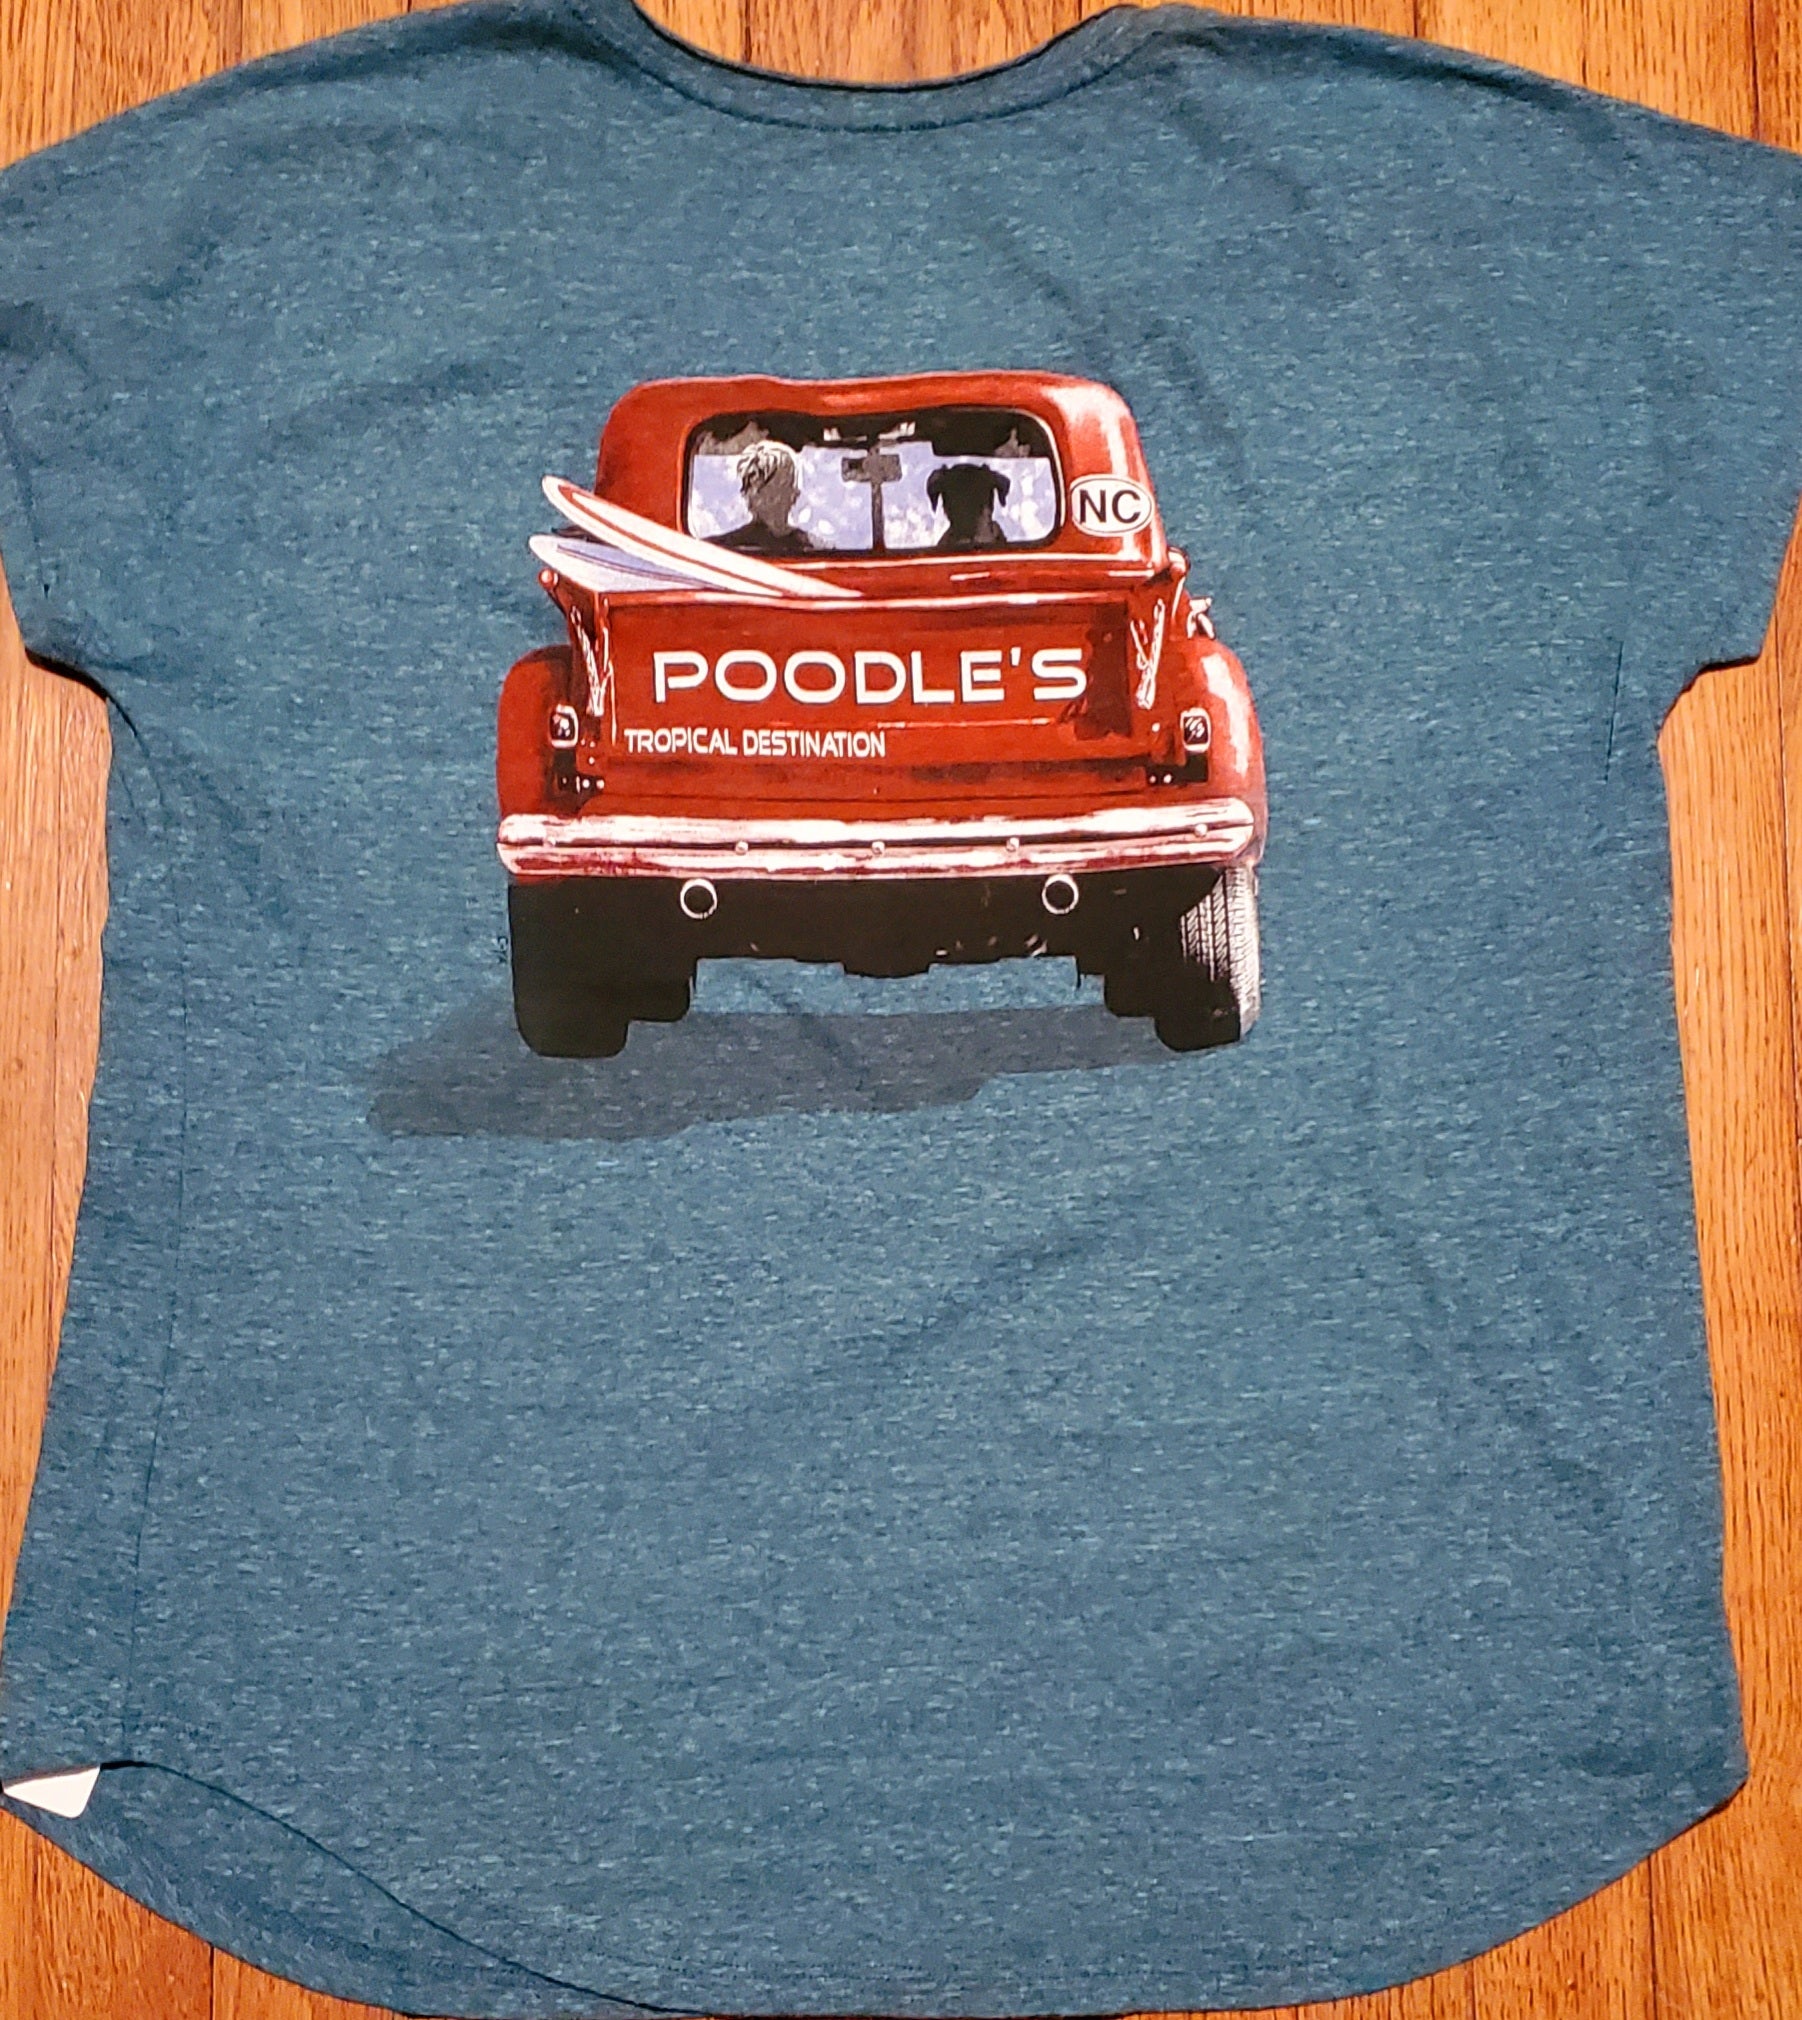 Poodle's Red Truck